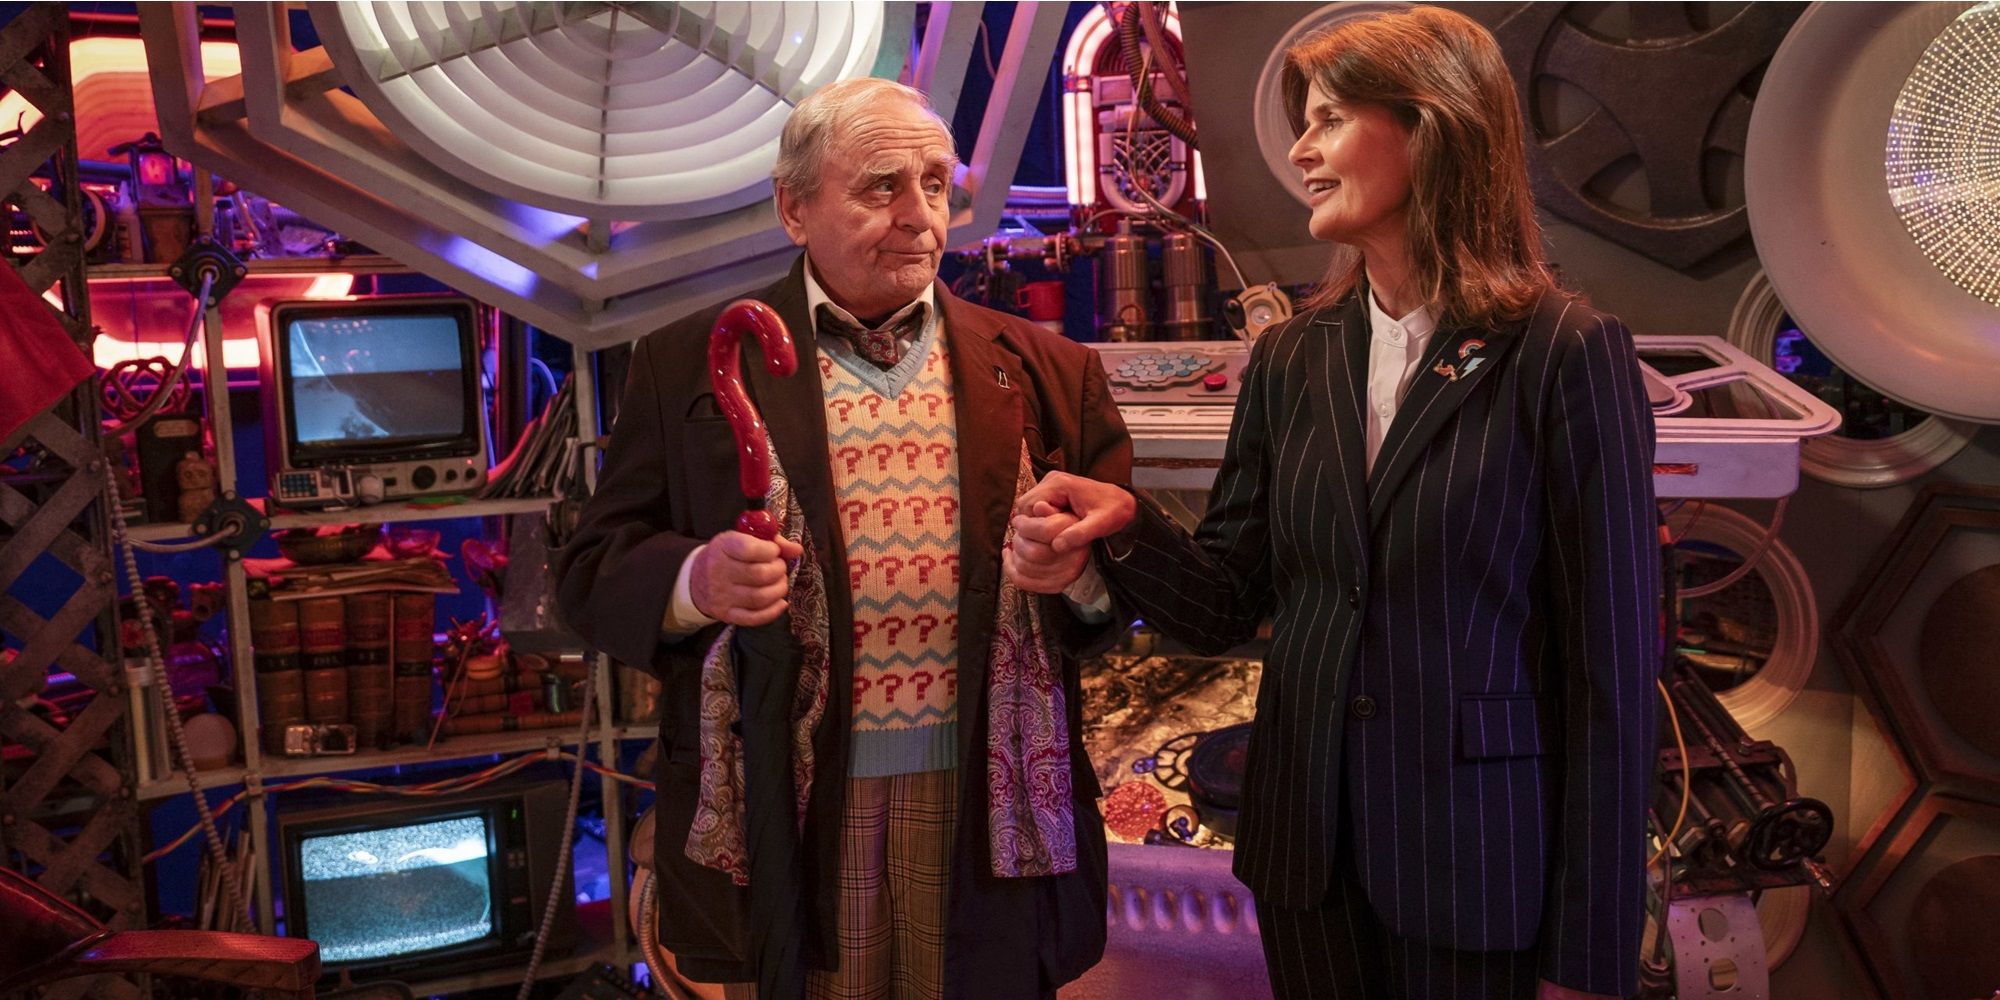 The Seventh Doctor standing, holding a close umbrella in one hand and taking Ace, standing dressed in a pinstripe suit, by the hand in Doctor Who TAles of the TARDISjpg